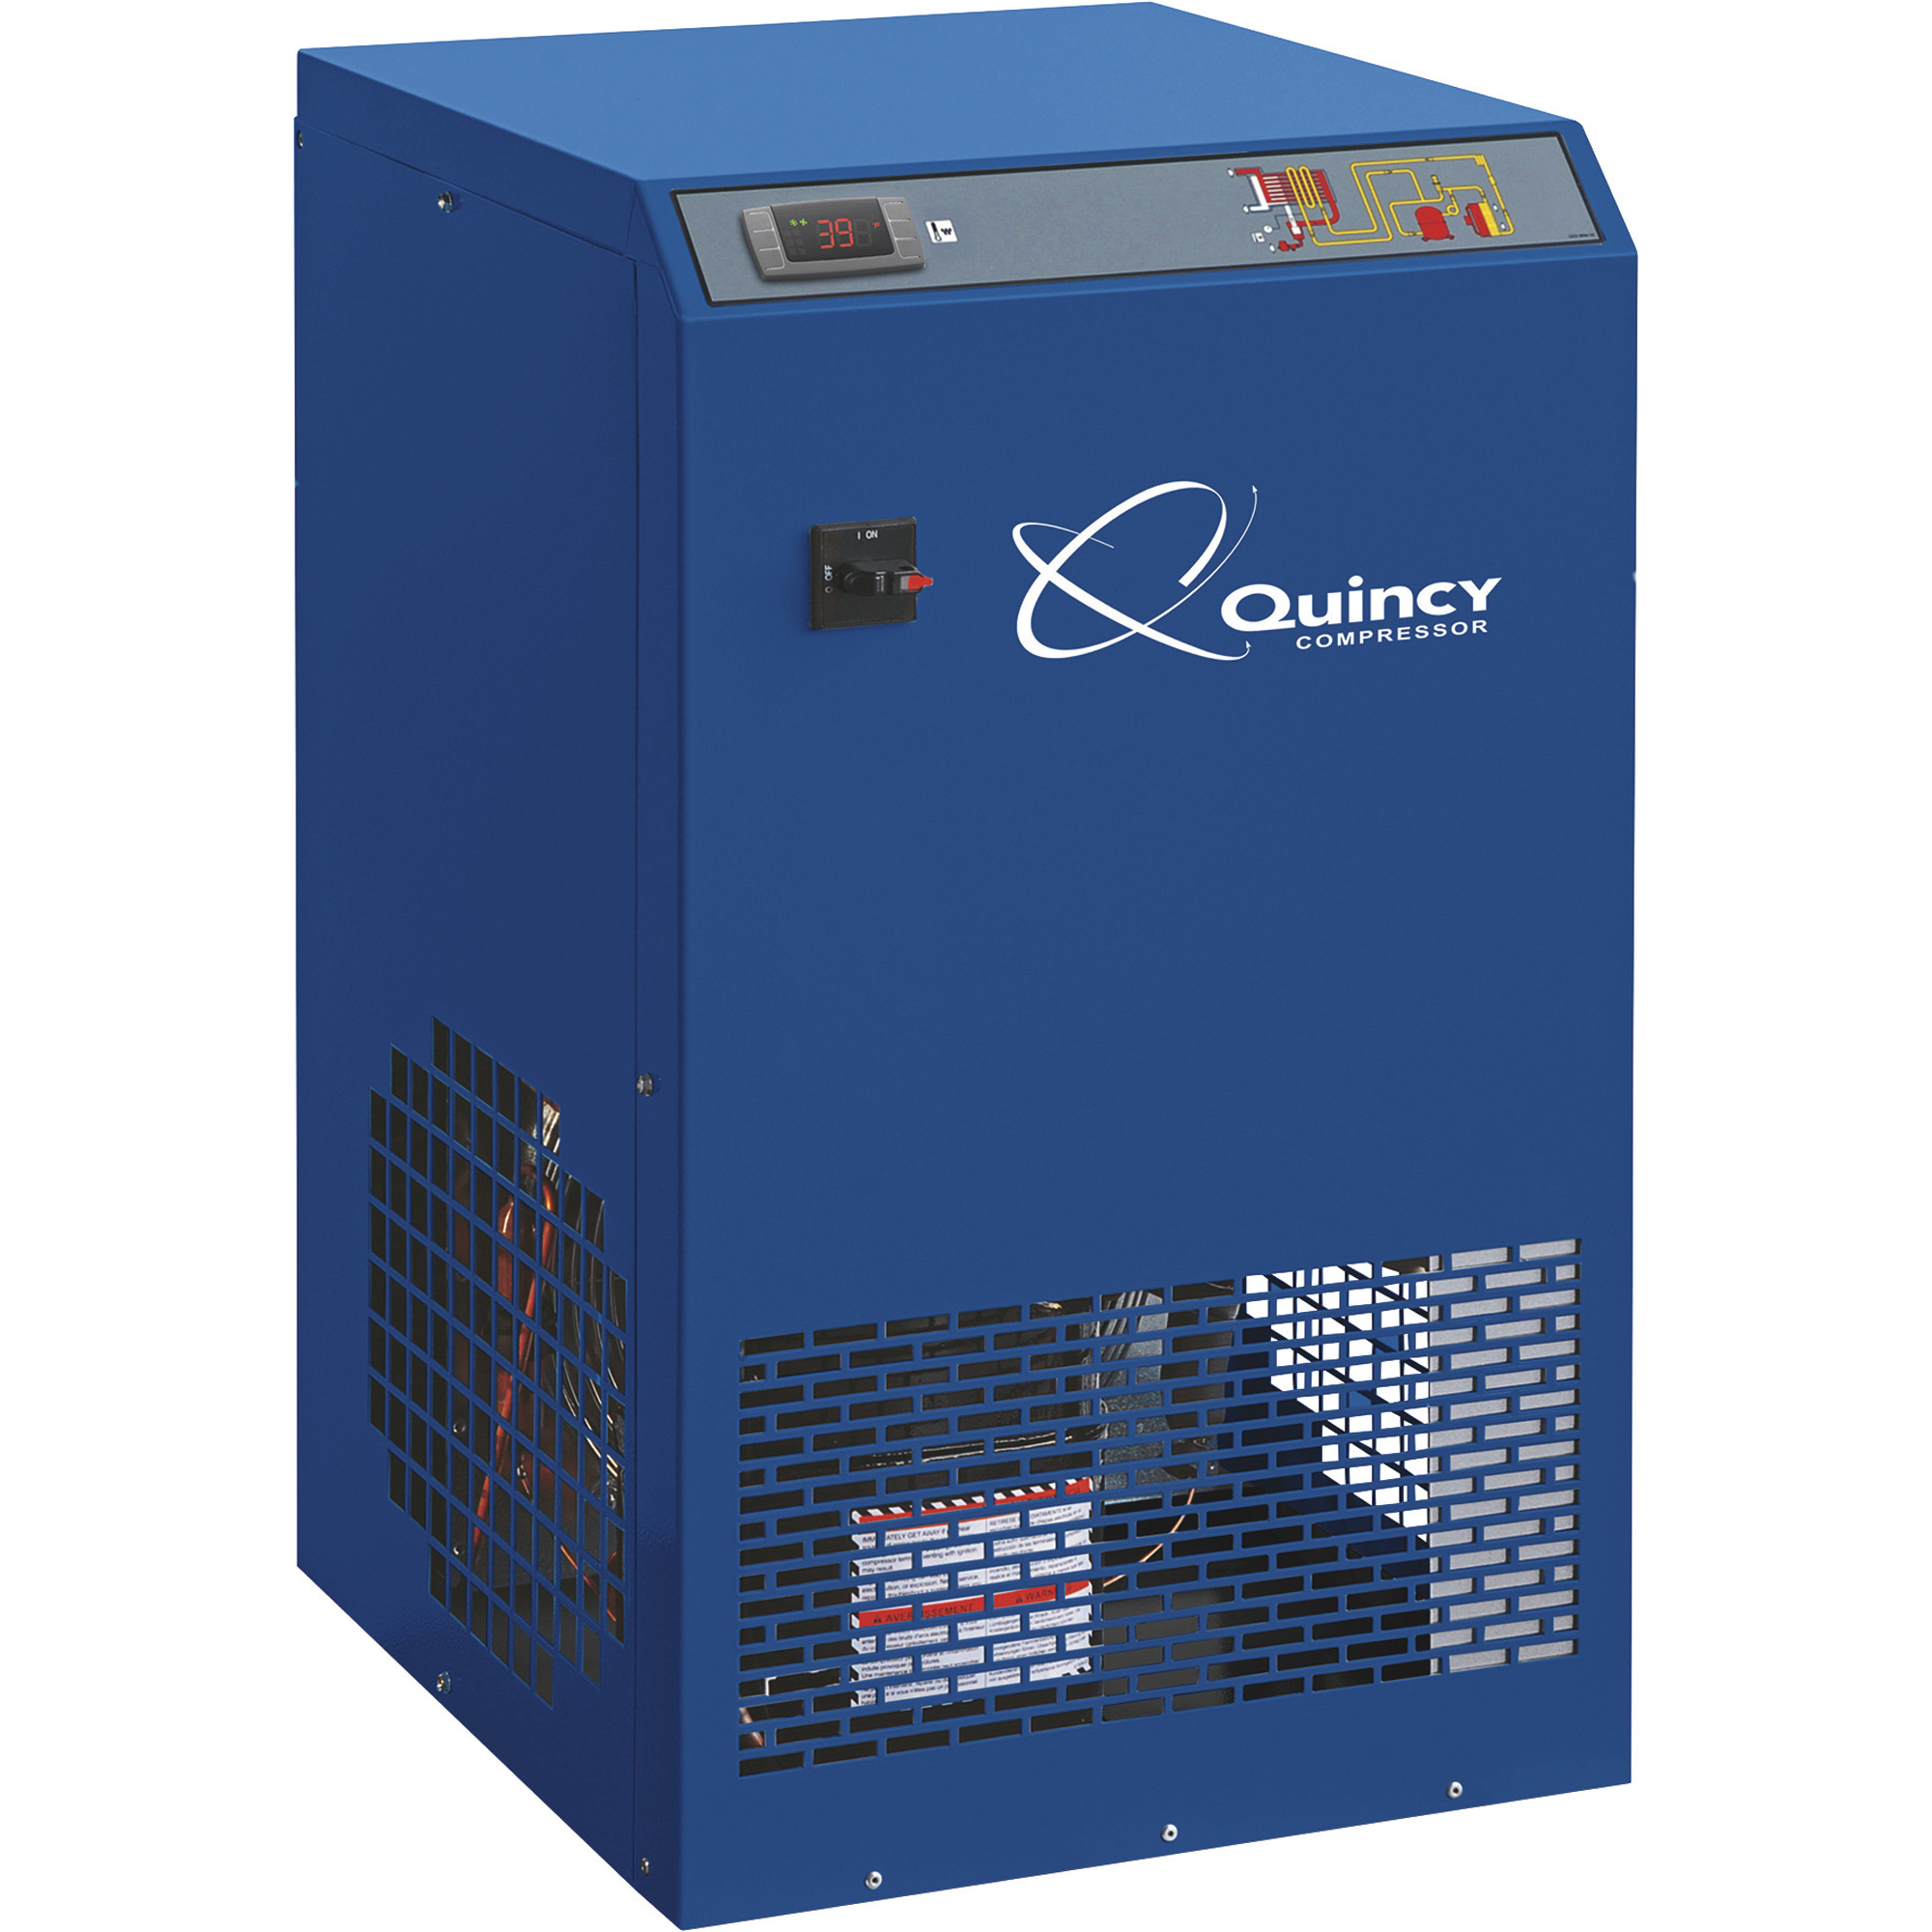 Quincy Non-Cycling Refrigerated Air Dryer, 127 CFM, 115 Volt, Single Phase, Model QPNC-127